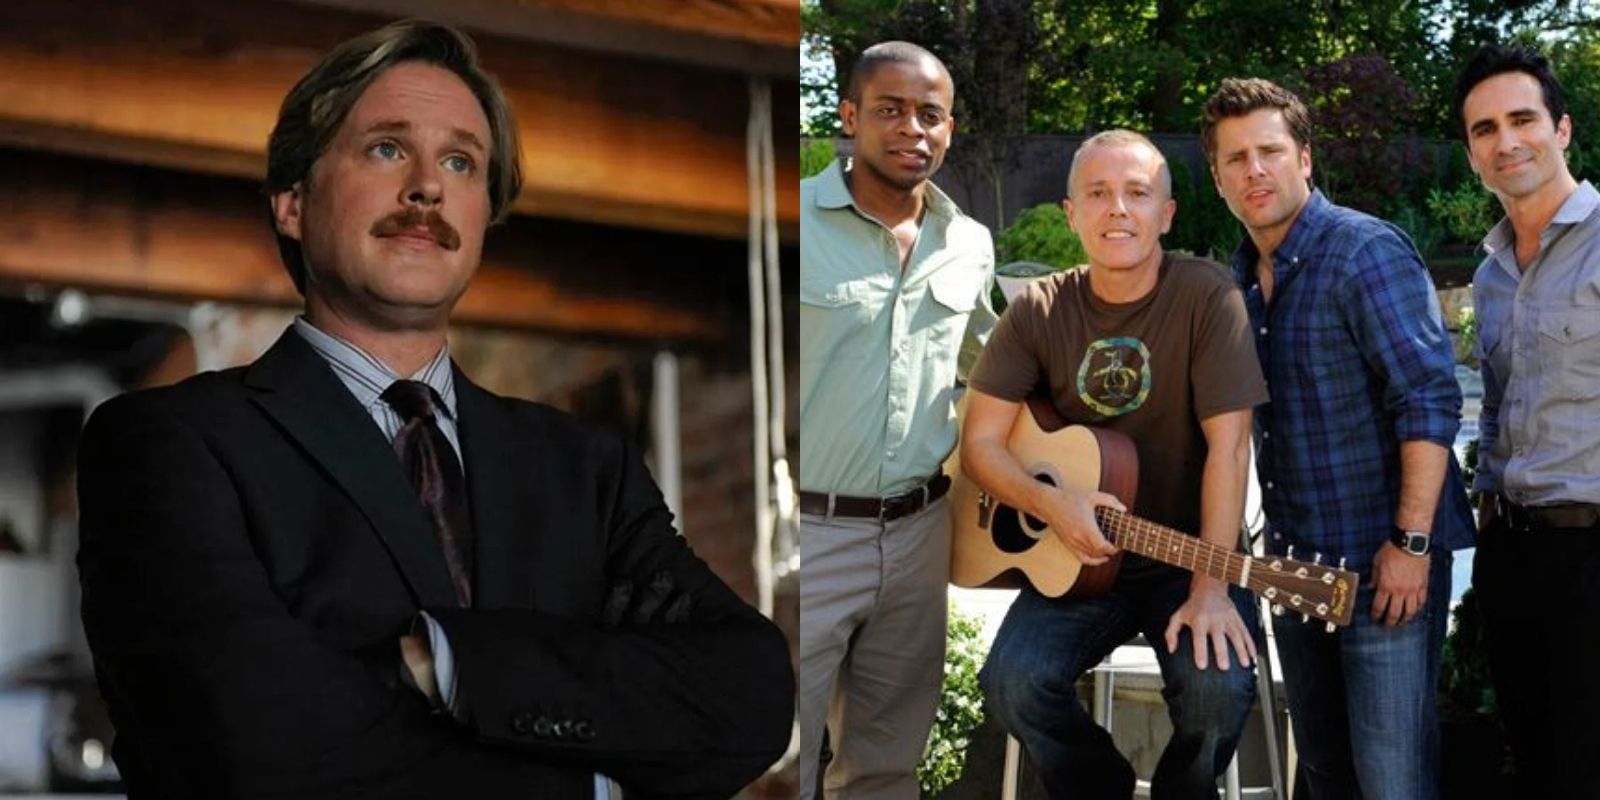 Pierre Despereaux stands with arms folded (L) and Curt Smith poses with the cast members of Psych (R)